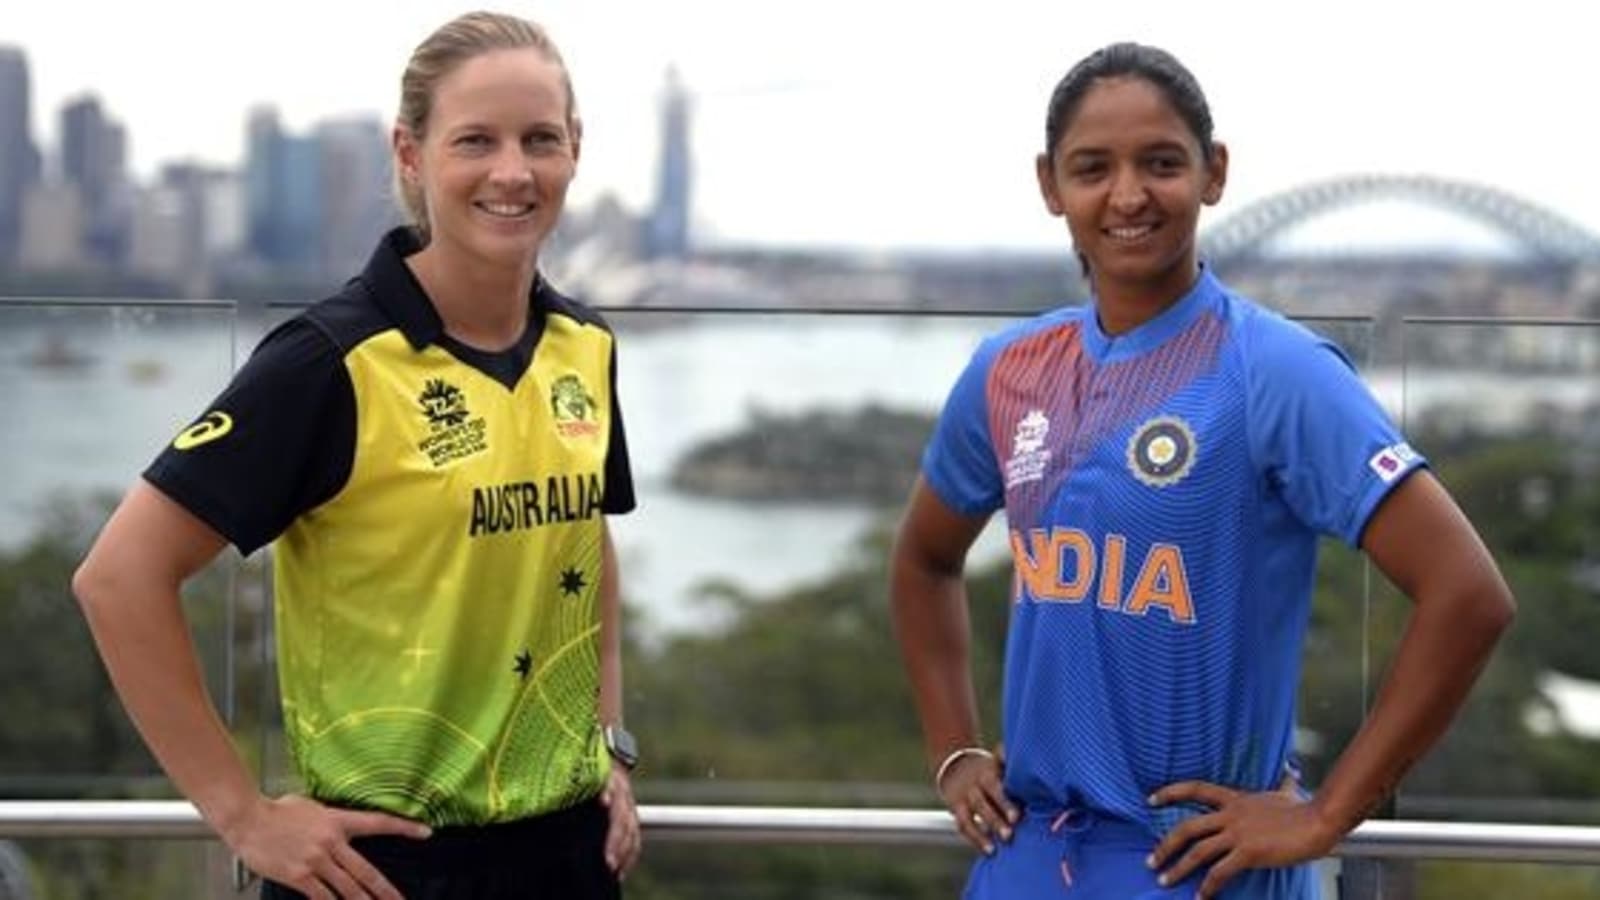 India vs Australia to open women's cricket competition at 2022